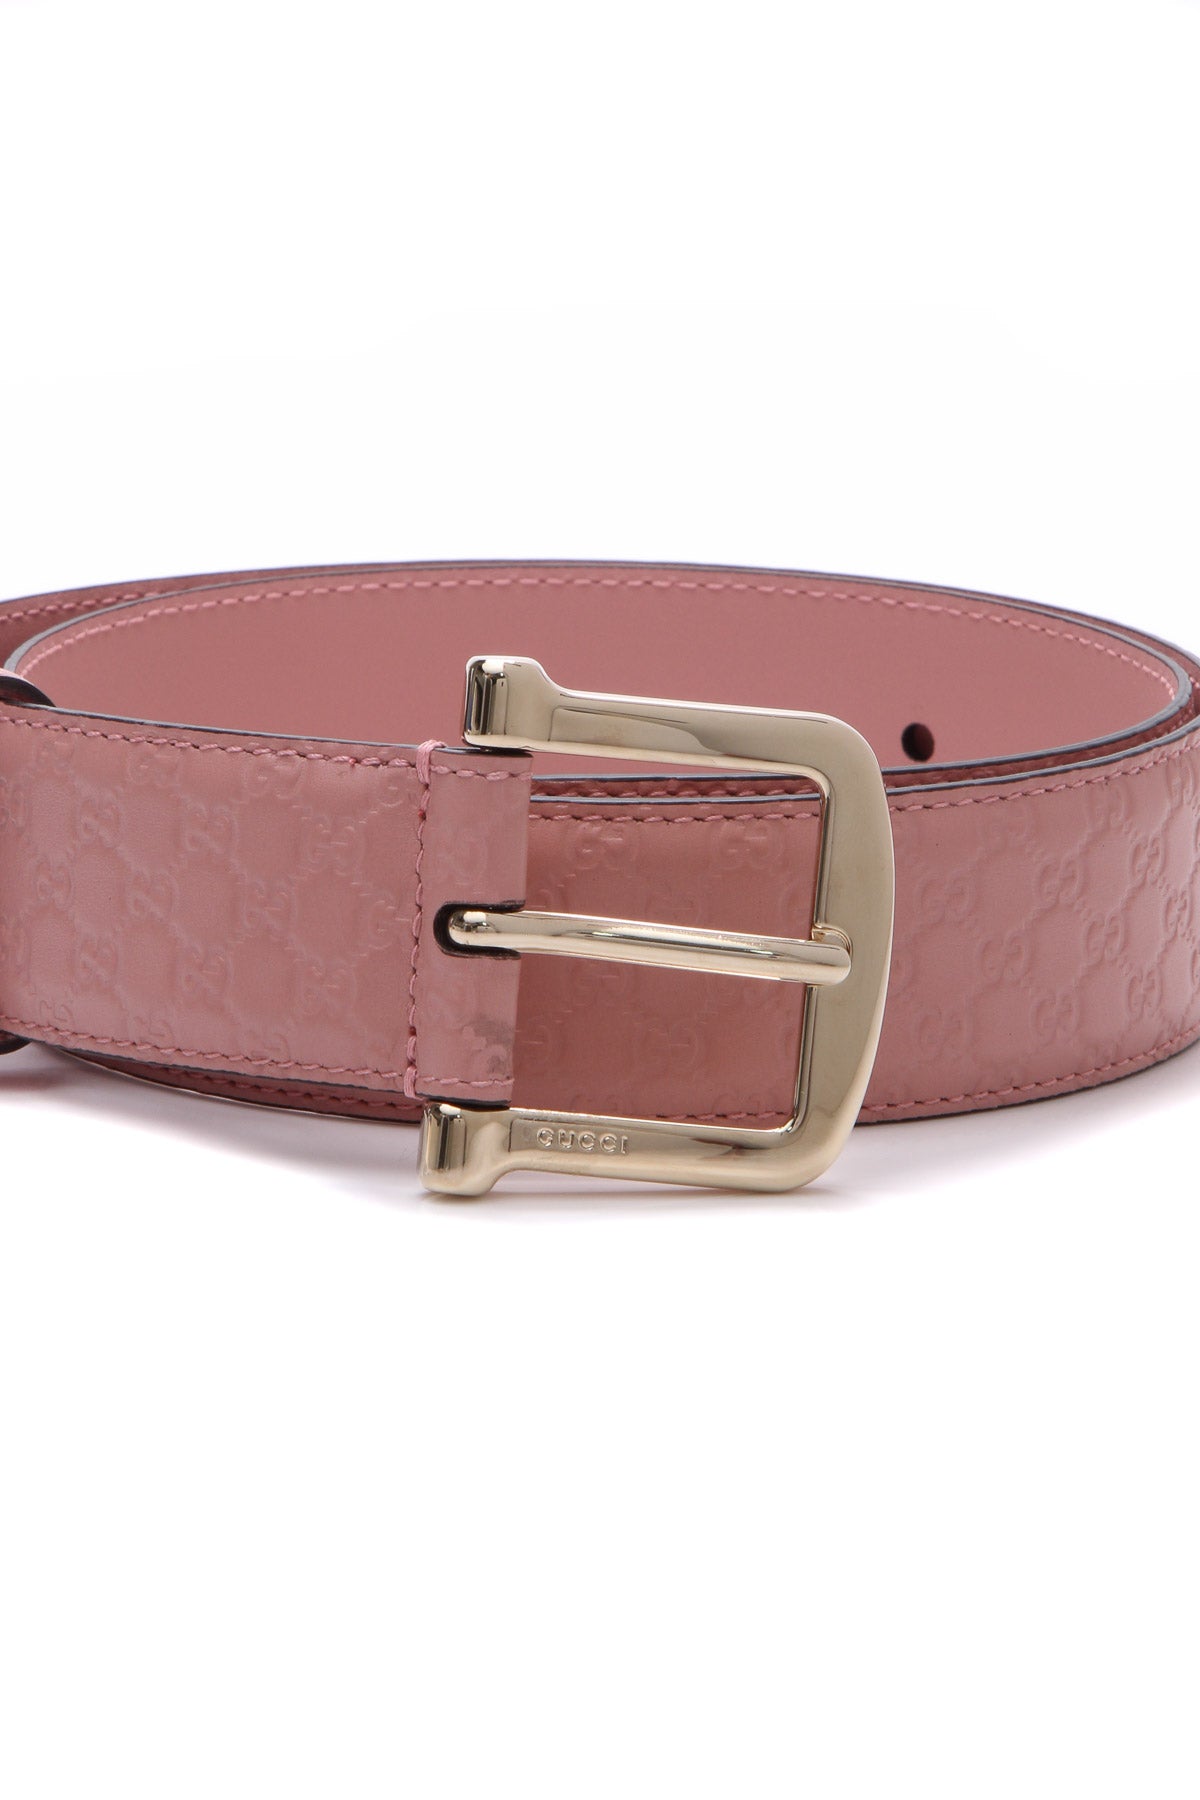 Gucci Women's Red Leather GG Microguccissima Buckle Belt, 34, Red at   Women's Clothing store